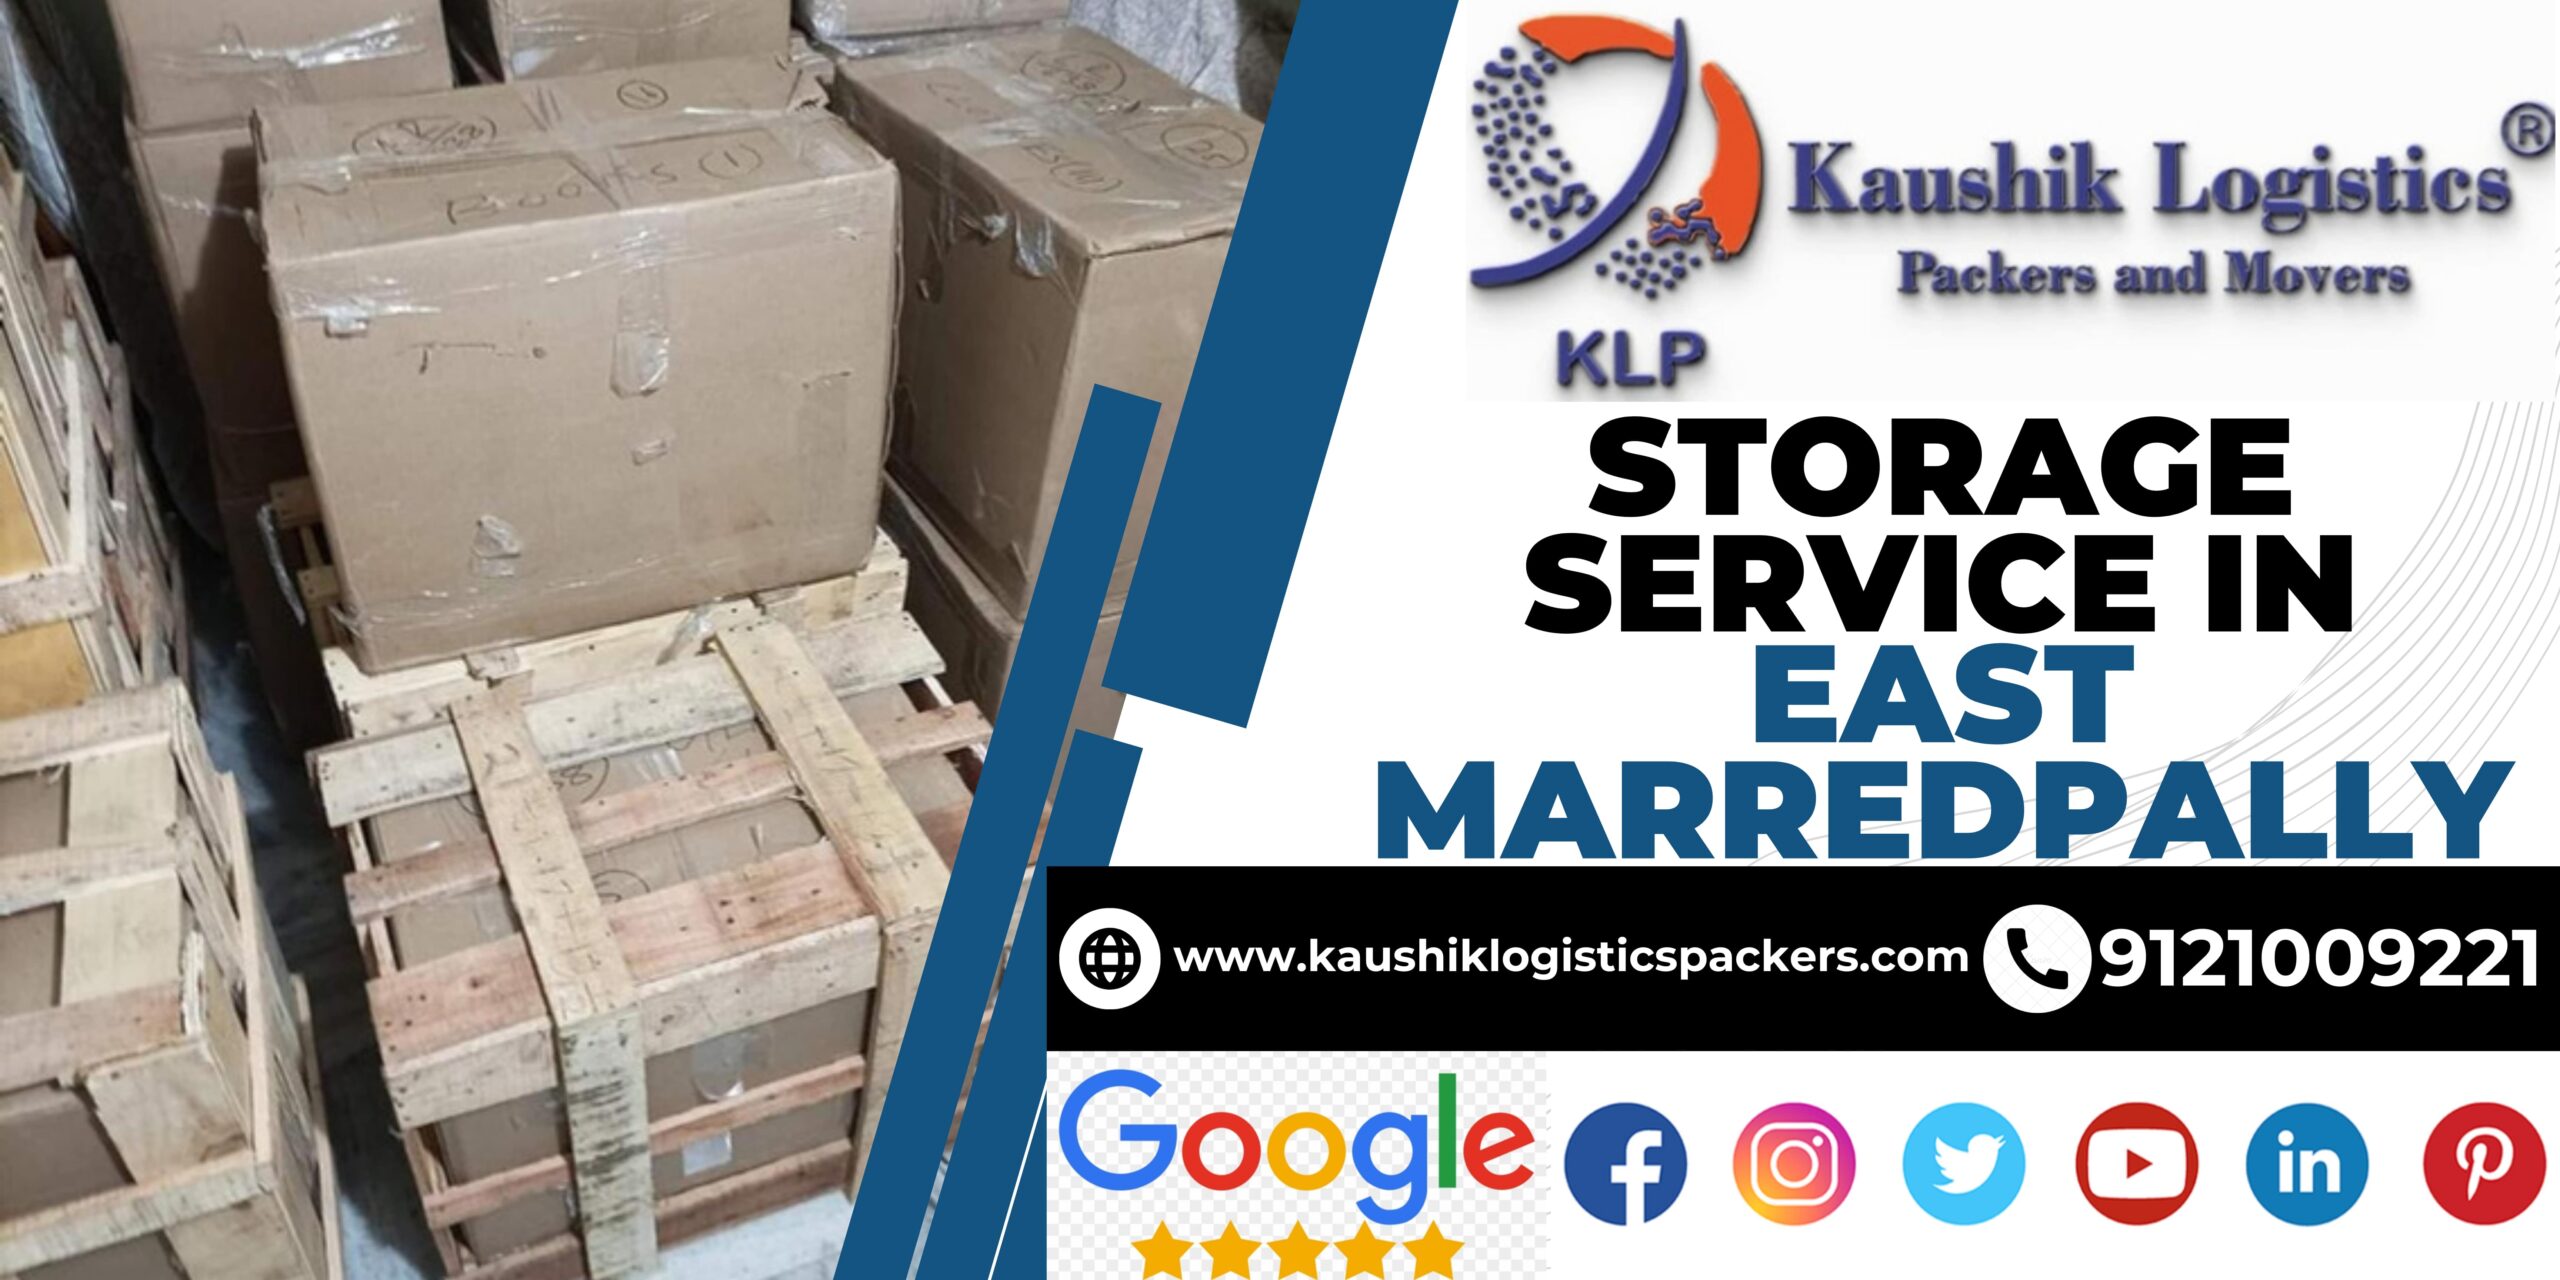 Packers and Movers In East Marredpally